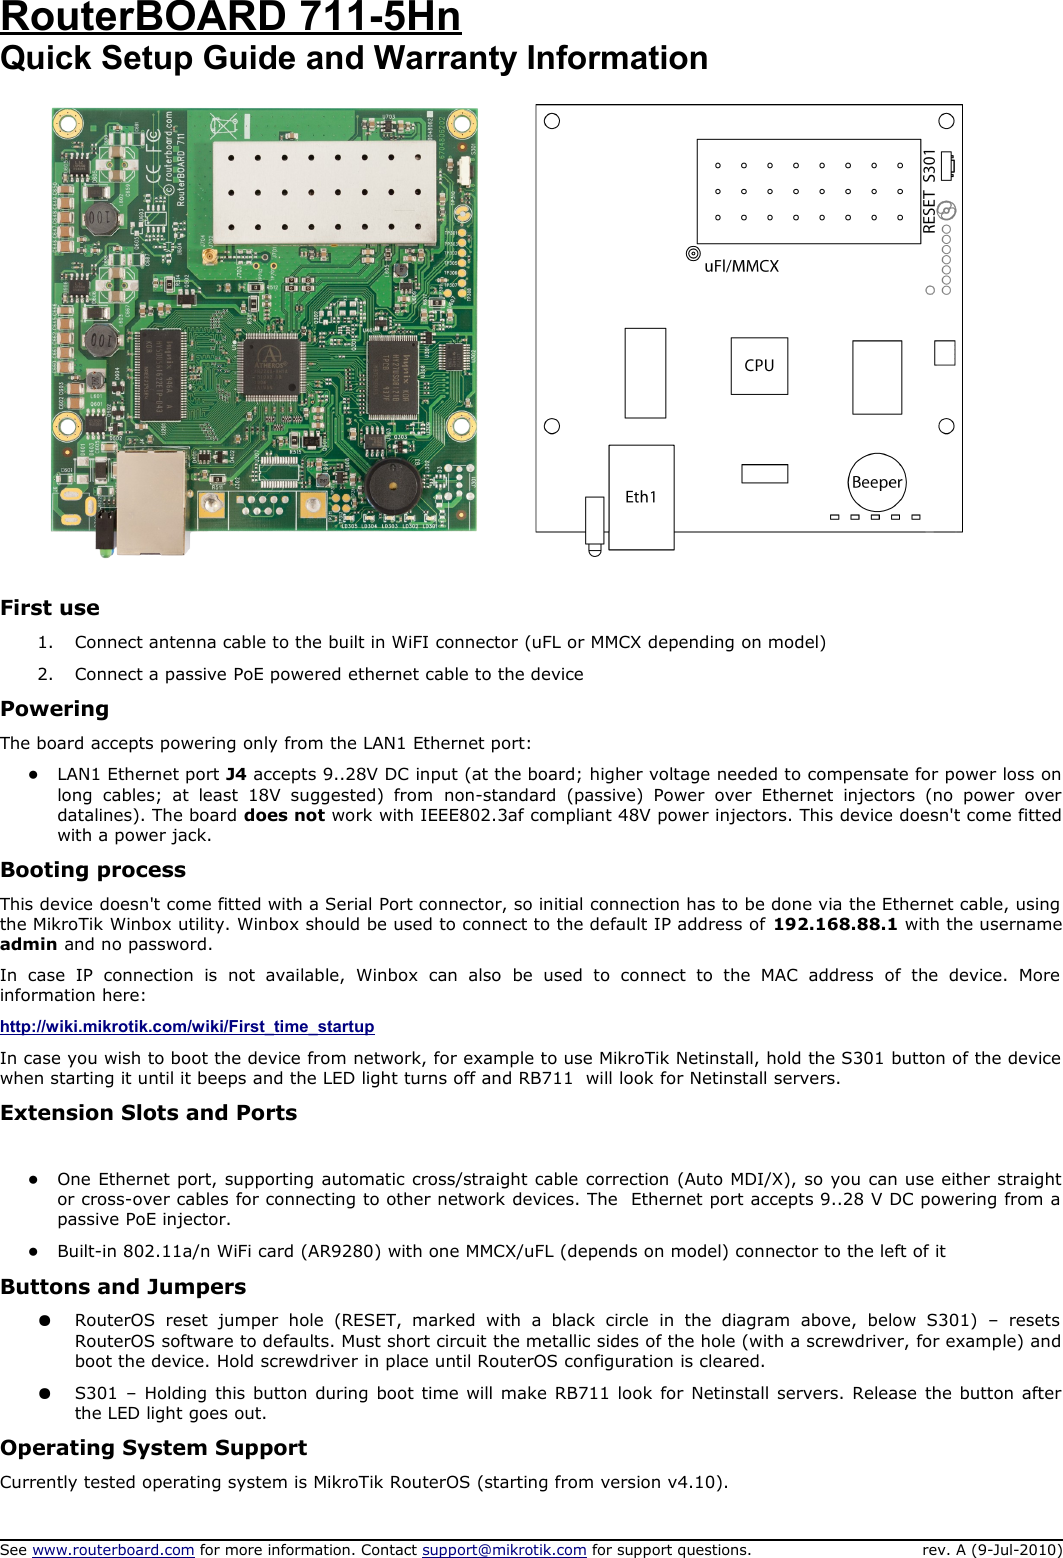 RouterBOARD 711-5HnQuick Setup Guide and Warranty InformationFirst use1. Connect antenna cable to the built in WiFI connector (uFL or MMCX depending on model)2. Connect a passive PoE powered ethernet cable to the devicePoweringThe board accepts powering only from the LAN1 Ethernet port:●LAN1 Ethernet port J4 accepts 9..28V DC input (at the board; higher voltage needed to compensate for power loss on long   cables; at   least 18V   suggested)   from  non-standard   (passive)   Power   over   Ethernet   injectors   (no power   over datalines). The board does not work with IEEE802.3af compliant 48V power injectors. This device doesn&apos;t come fitted with a power jack. Booting processThis device doesn&apos;t come fitted with a Serial Port connector, so initial connection has to be done via the Ethernet cable, using  the MikroTik Winbox utility. Winbox should be used to connect to the default IP address of 192.168.88.1 with the username admin and no password. In   case   IP   connection   is   not   available,   Winbox   can   also   be  used   to   connect   to  the   MAC   address   of   the   device.   More  information here: http://wiki.mikrotik.com/wiki/First_time_startupIn case you wish to boot the device from network, for example to use MikroTik Netinstall, hold the S301 button of the device  when starting it until it beeps and the LED light turns off and RB711  will look for Netinstall servers. Extension Slots and Ports●One Ethernet port, supporting automatic cross/straight cable correction (Auto MDI/X), so you can use either straight or cross-over cables for connecting to other network devices. The  Ethernet port accepts 9..28 V DC powering from a  passive PoE injector. ●Built-in 802.11a/n WiFi card (AR9280) with one MMCX/uFL (depends on model) connector to the left of itButtons and Jumpers●RouterOS  reset   jumper   hole   (RESET,   marked   with   a   black   circle   in  the  diagram   above,   below   S301)   –   resets  RouterOS software to defaults. Must short circuit the metallic sides of the hole (with a screwdriver, for example) and boot the device. Hold screwdriver in place until RouterOS configuration is cleared.  ●S301  – Holding this button during boot time will make RB711 look for Netinstall servers. Release the button after the LED light goes out. Operating System SupportCurrently tested operating system is MikroTik RouterOS (starting from version v4.10).See www.routerboard.com for more information. Contact support@mikrotik.com for support questions. rev. A (9-Jul-2010)